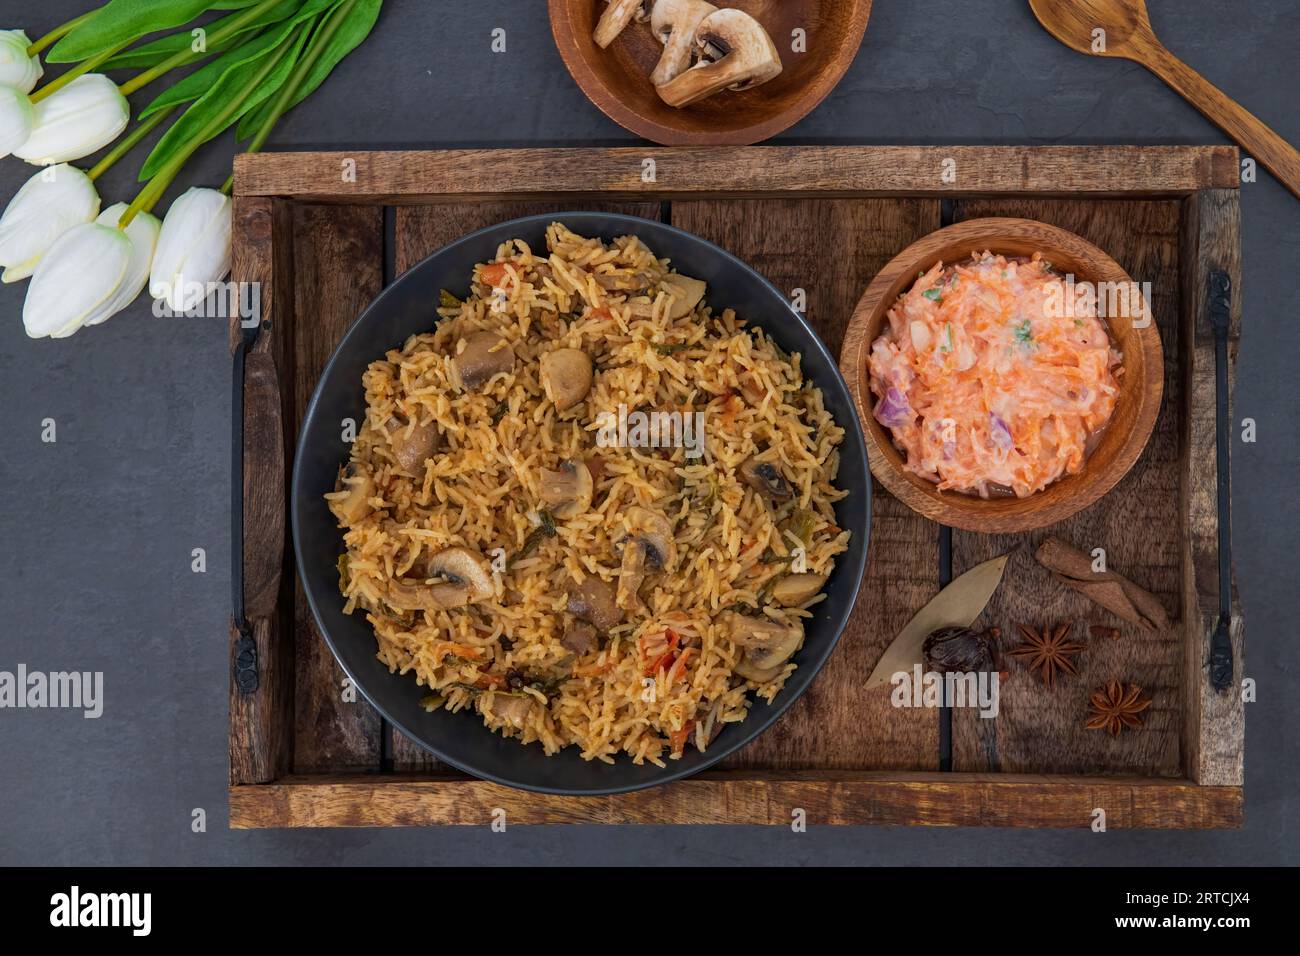 Tasty Mushroom or Mashroom Rice or Pulav or Pilaf or Pulao or Biryani served in bowl or plate. Delicious Mushroom fried rice with isolated background. Stock Photo